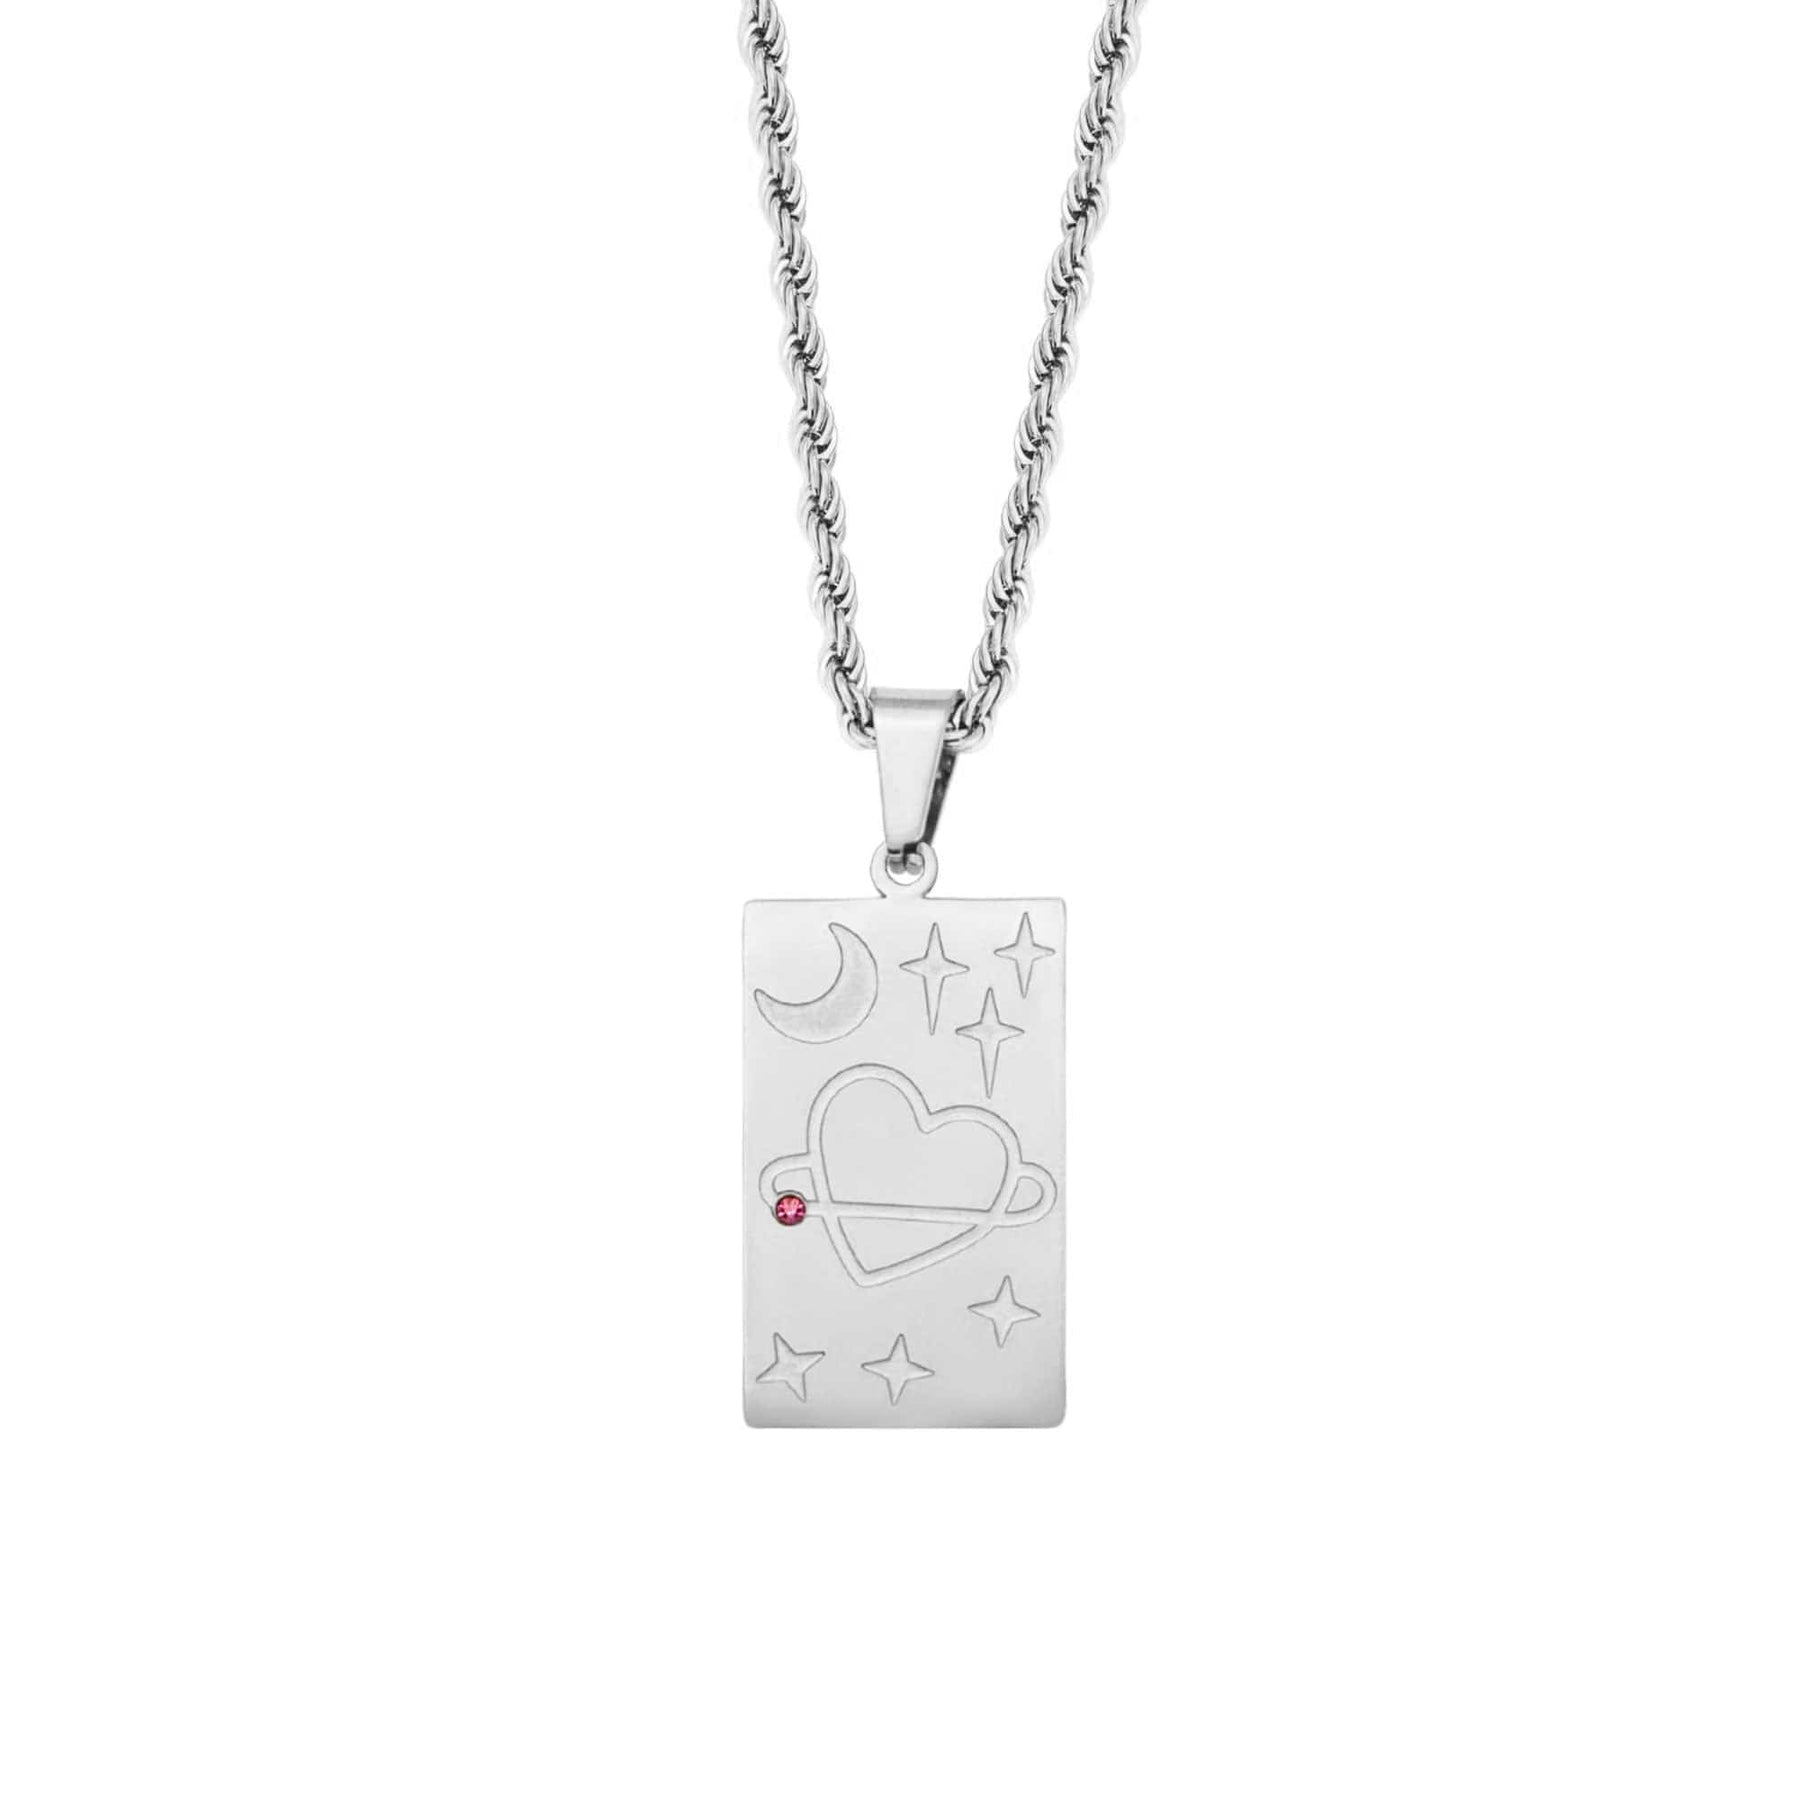 BohoMoon Stainless Steel Summer Nights Necklace Silver